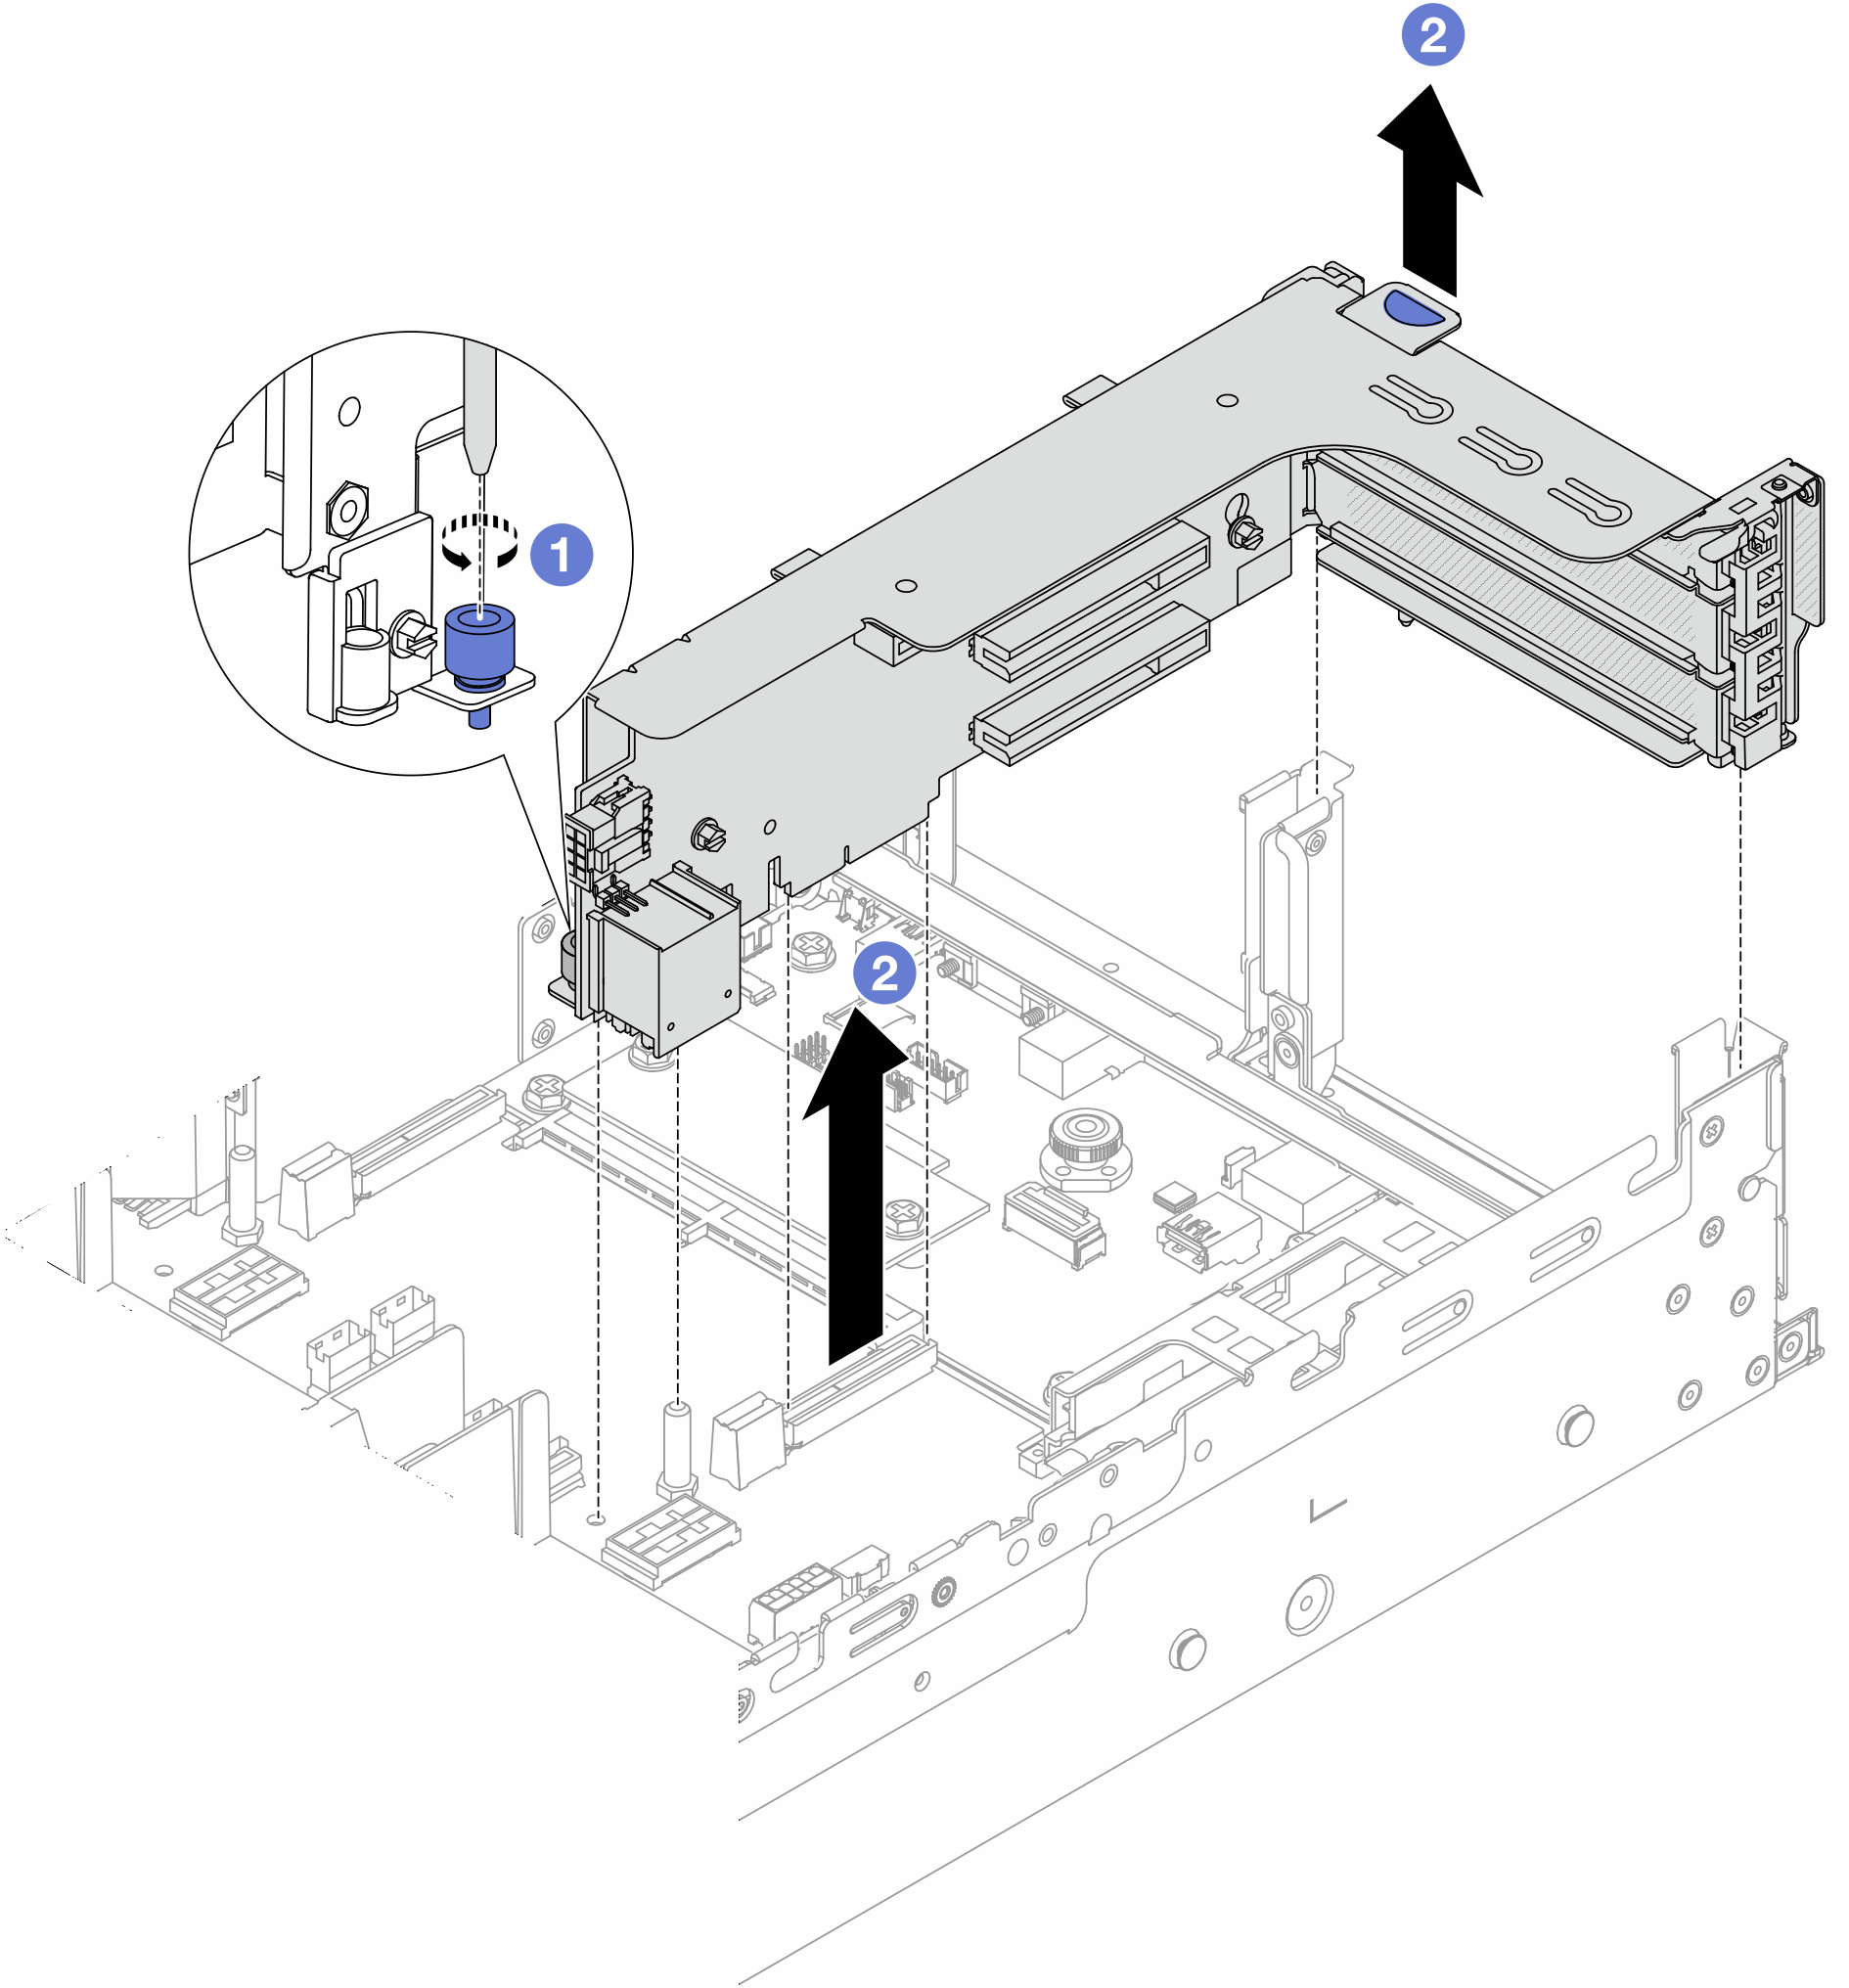 Removing the riser 1 assembly